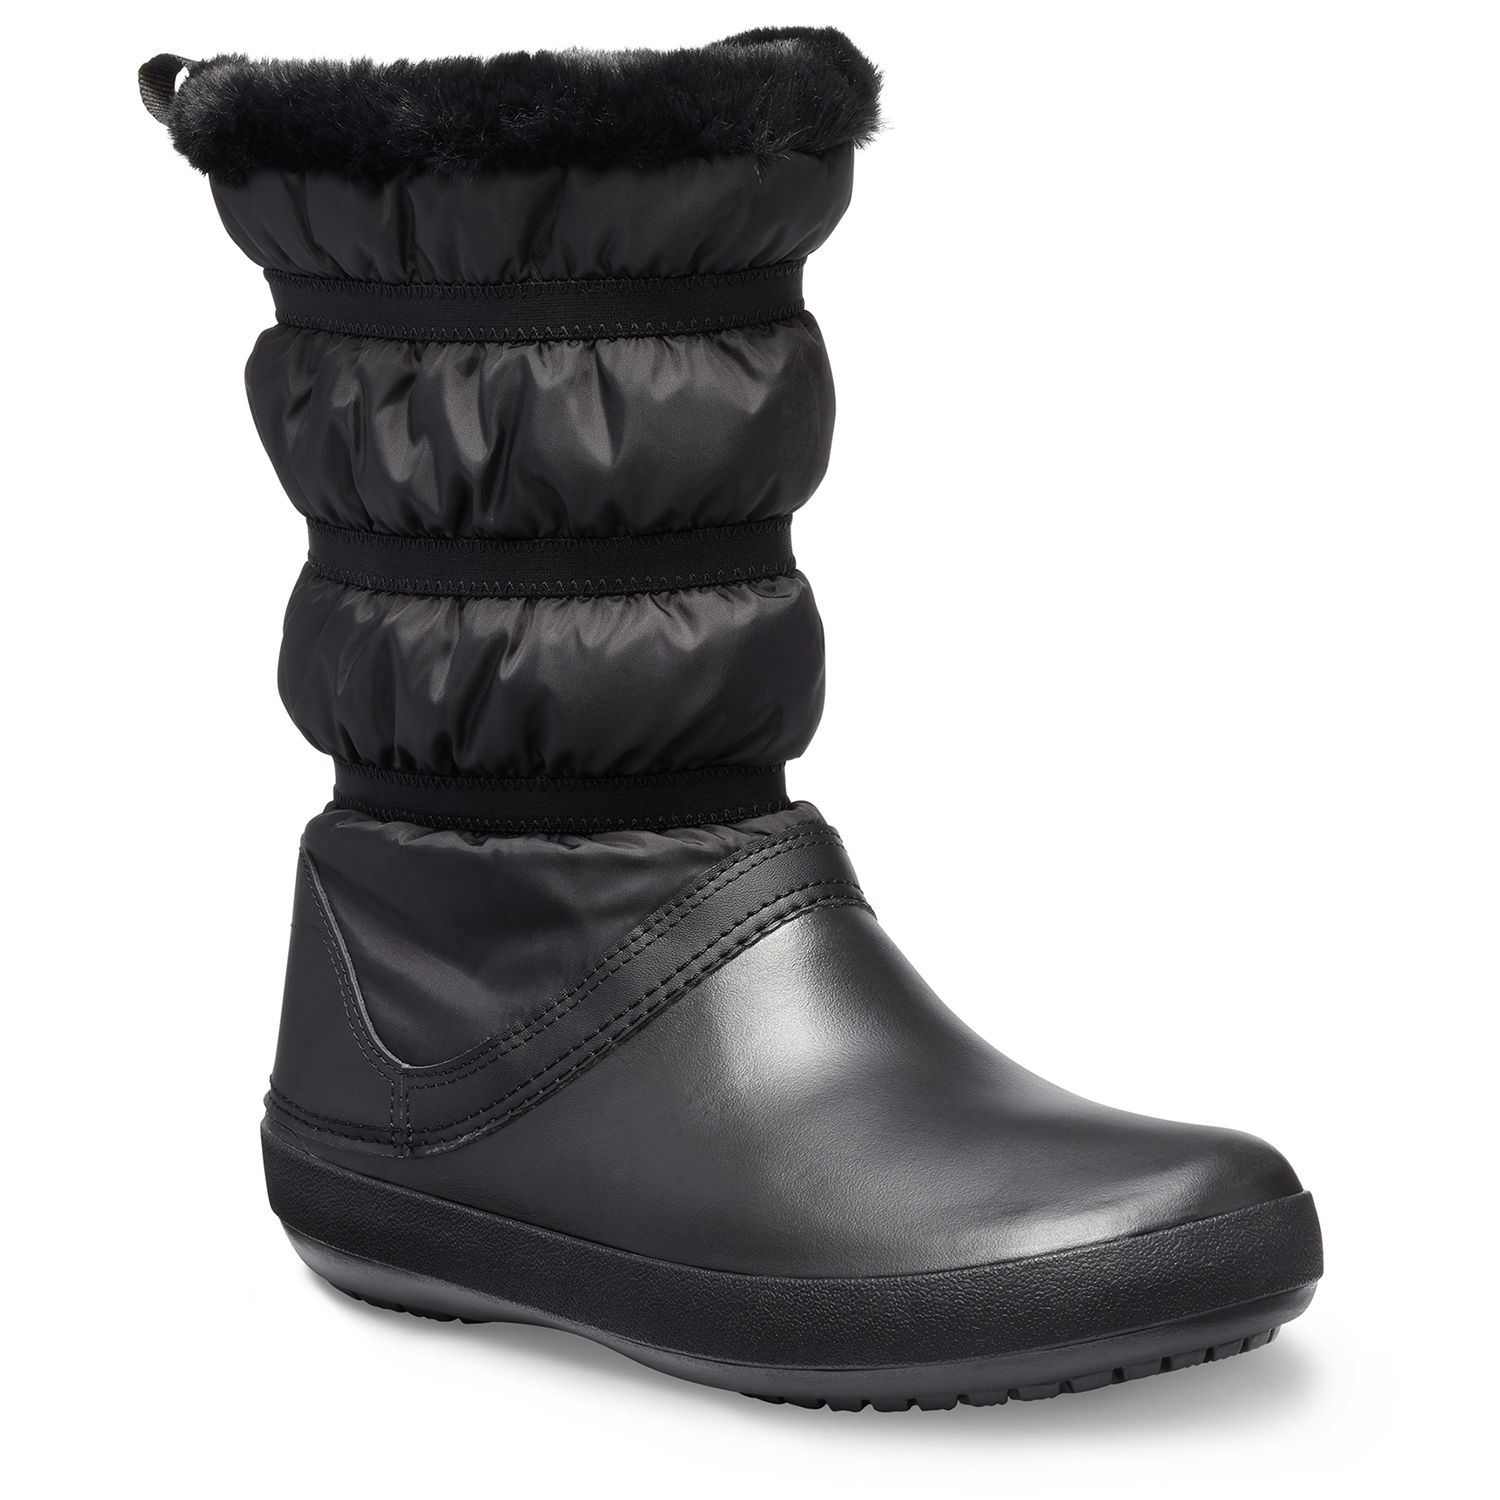 Water Resistant Winter Boots